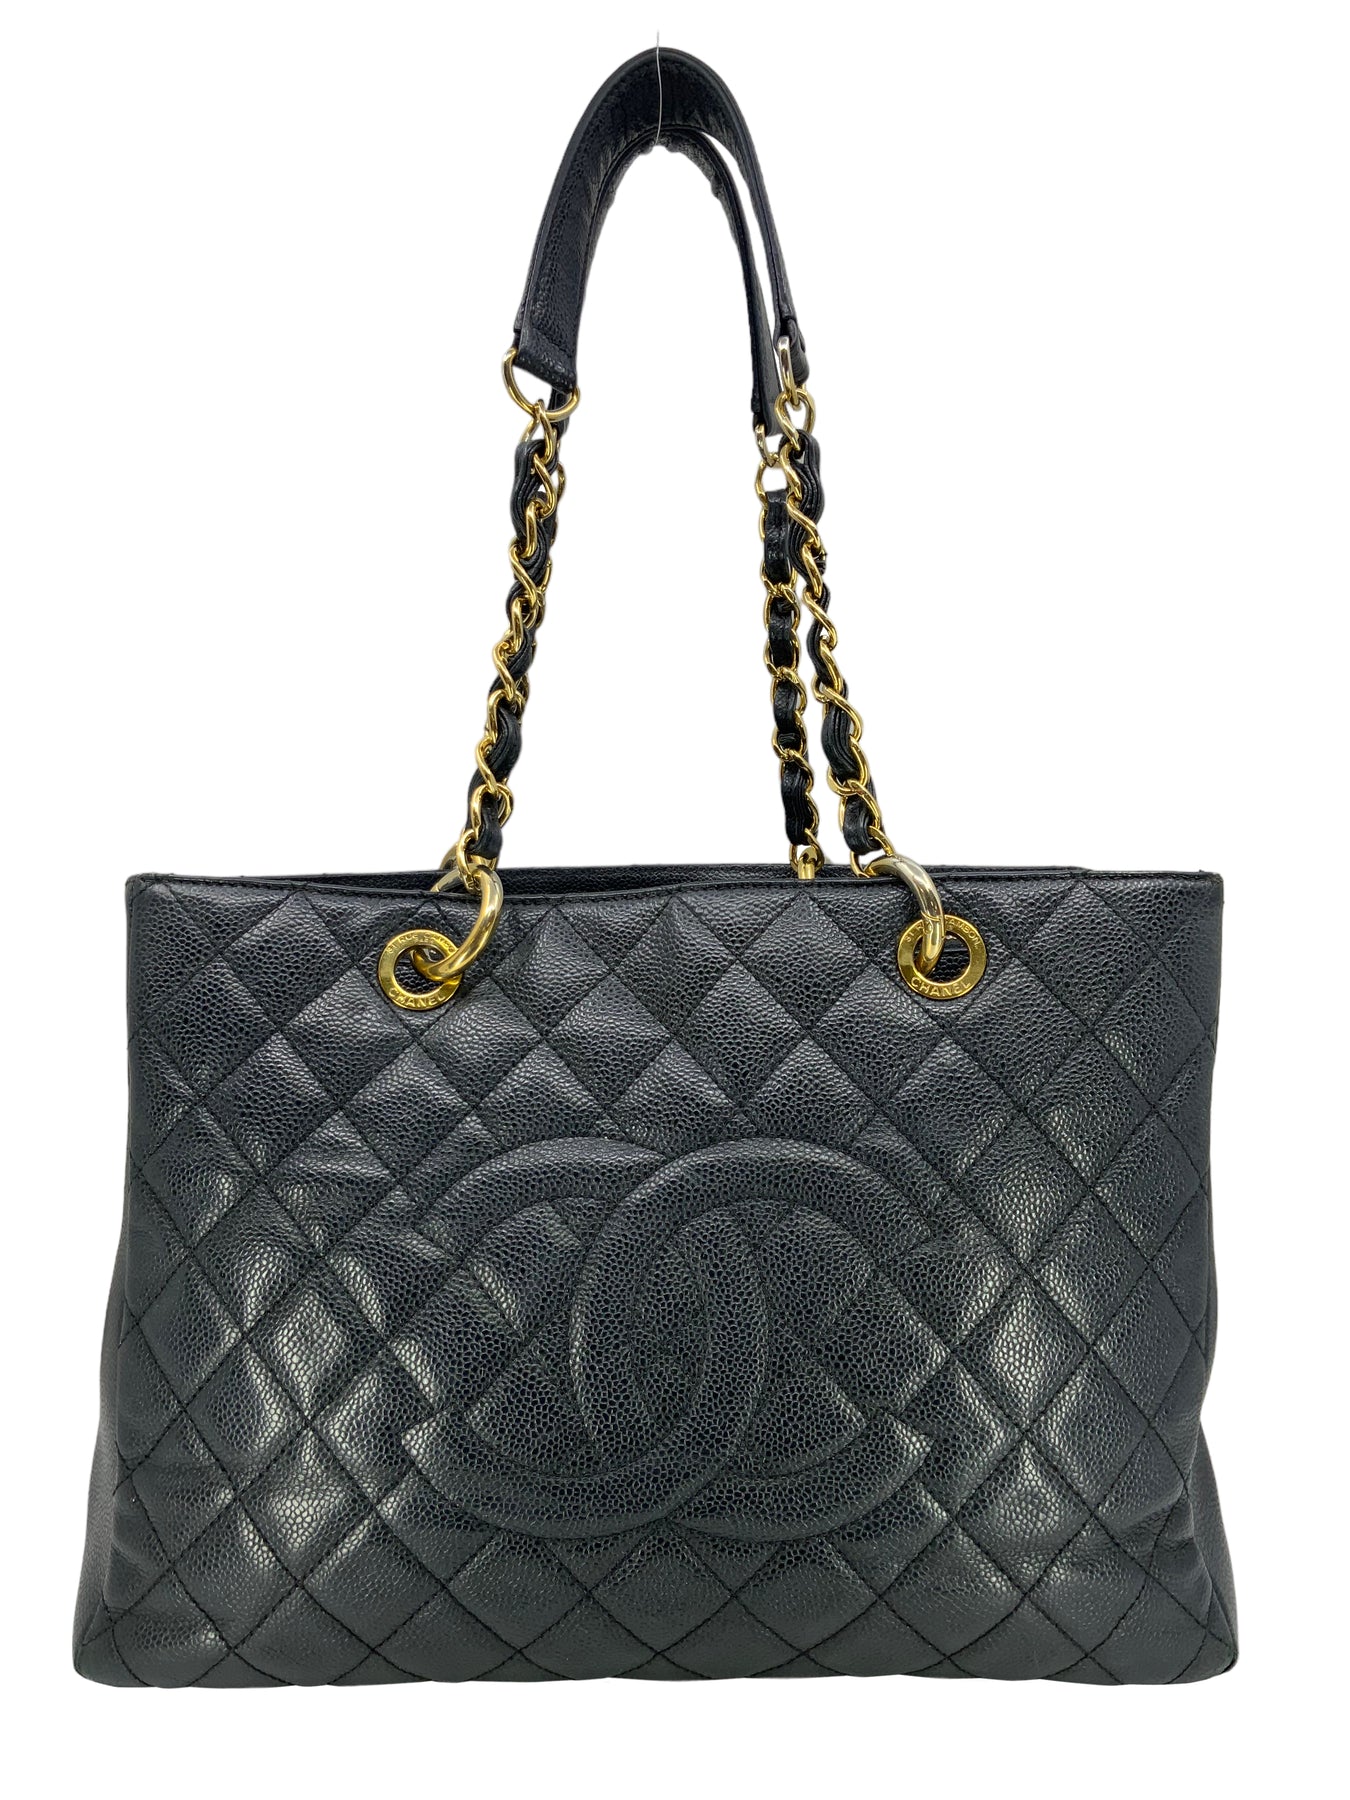 Chanel Green Caviar Timeless Tote Large